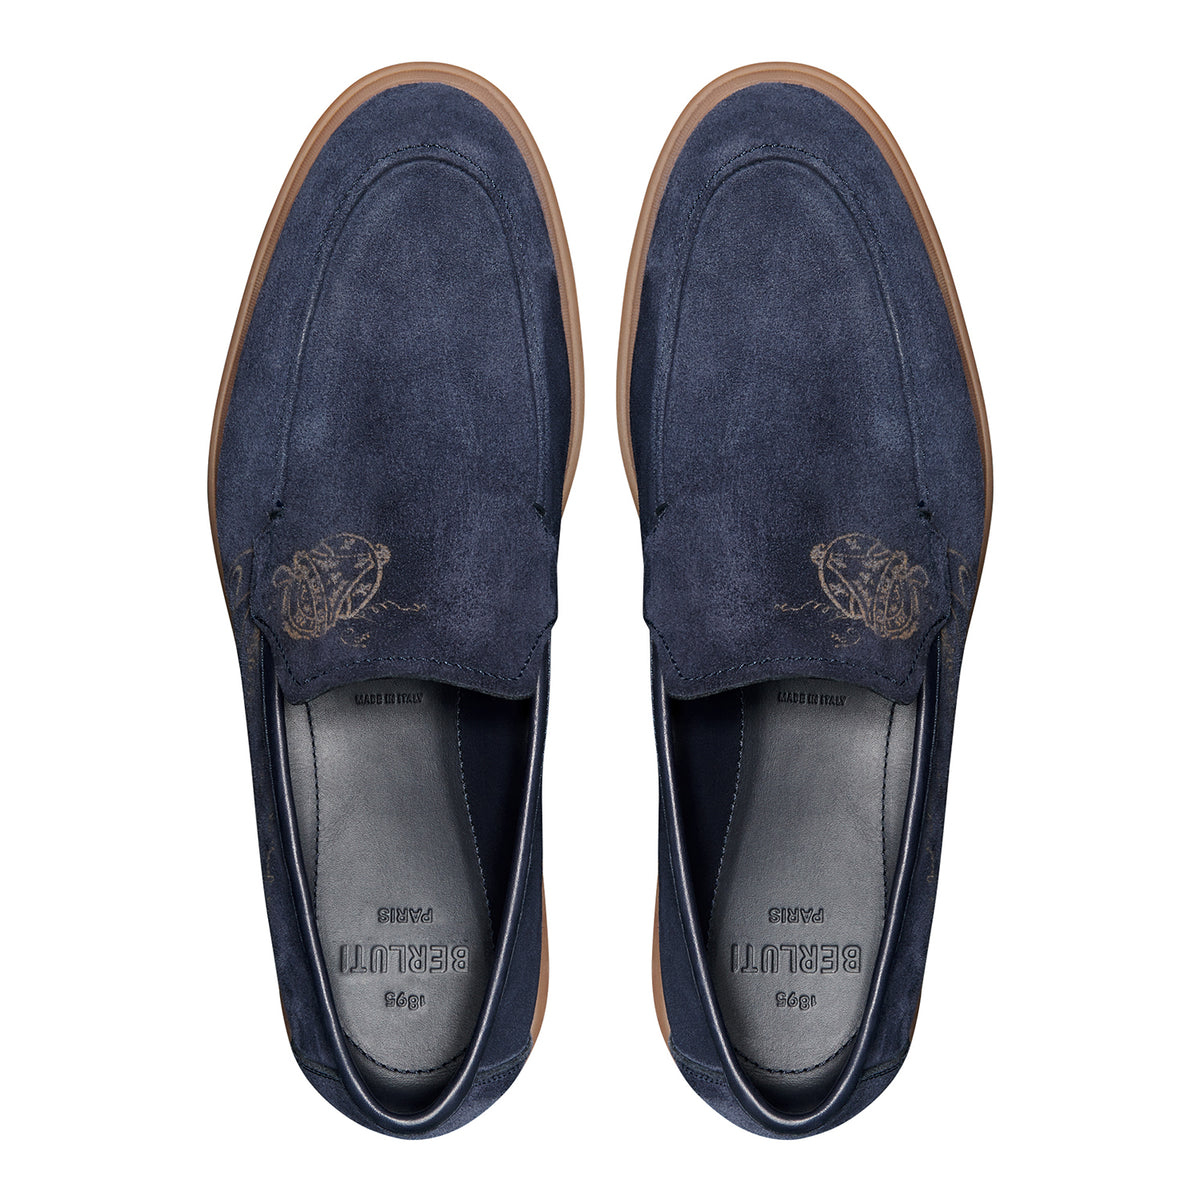 Latitude Suede Leather Loafer